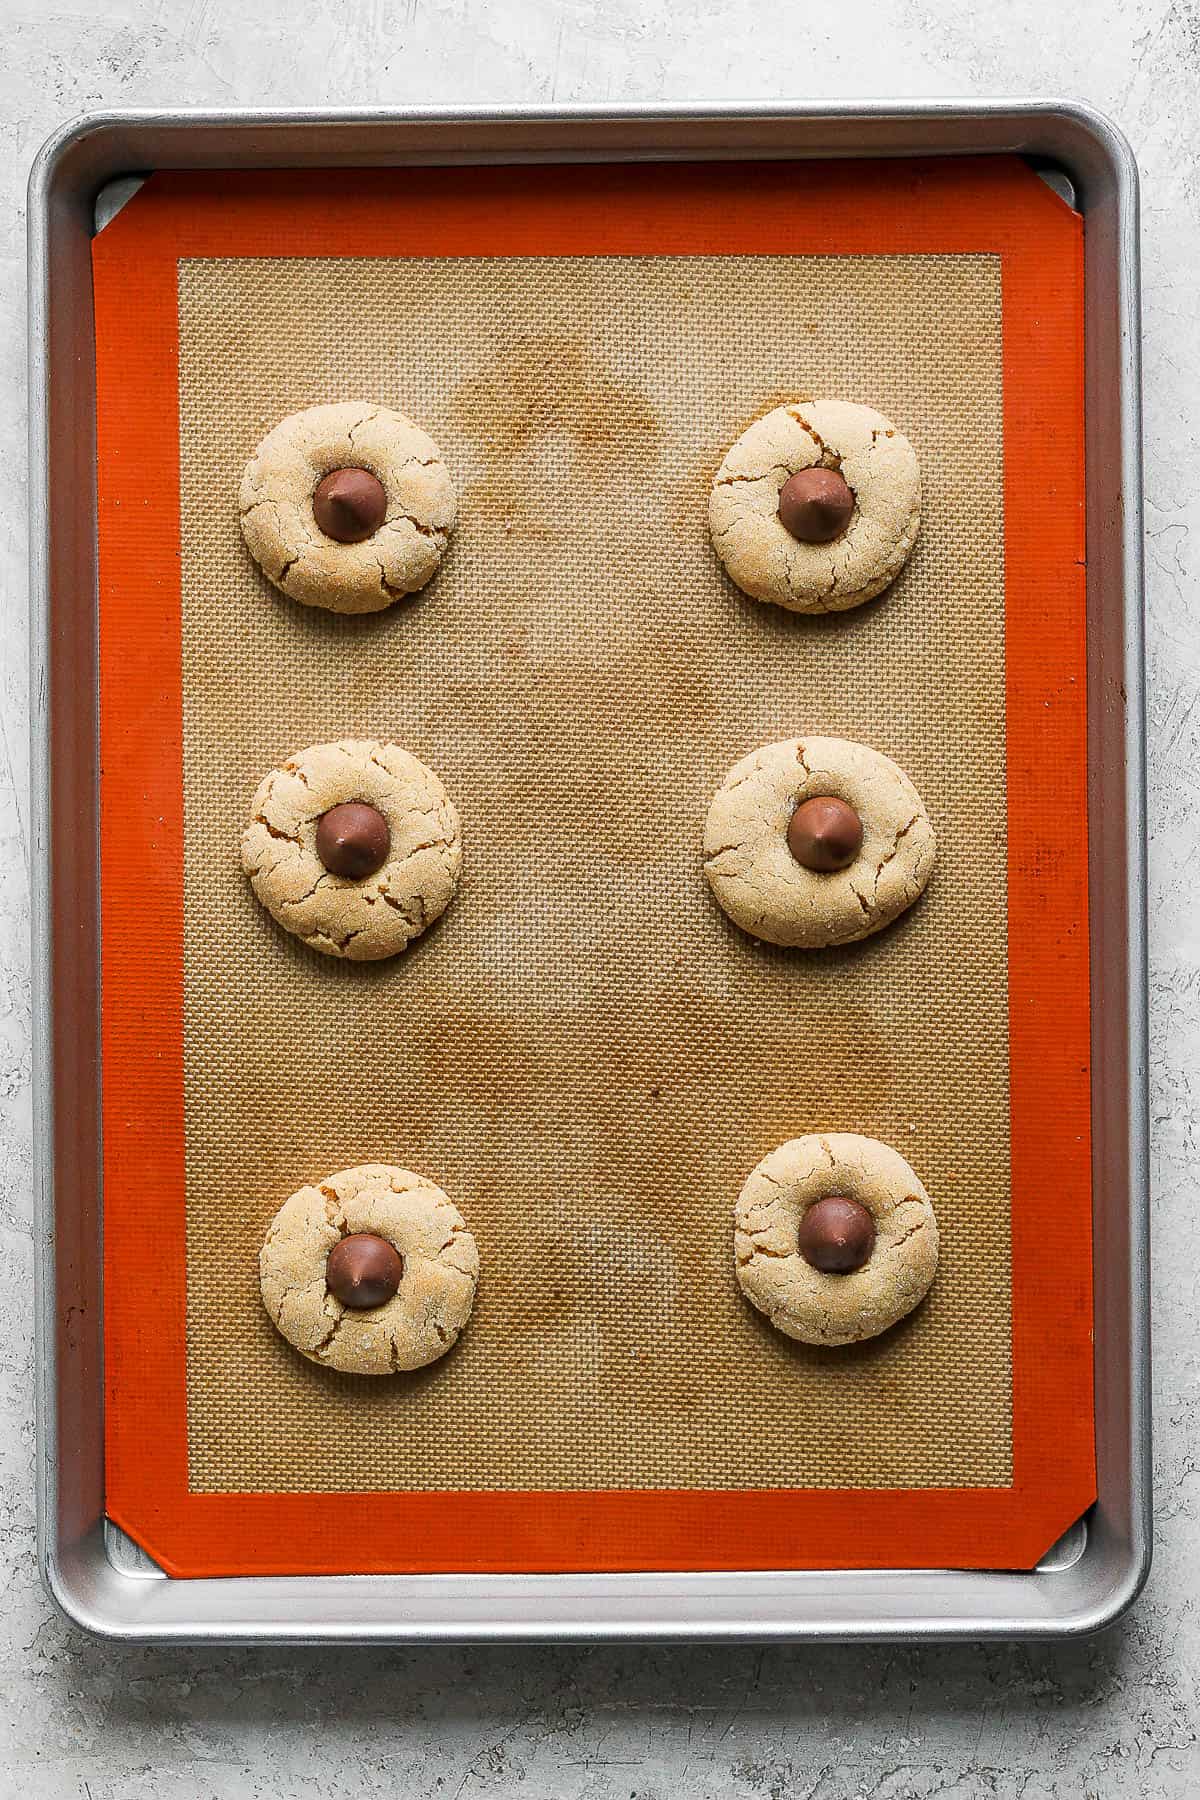 Gluten free peanut butter blossoms on a baking sheet after baking and with the chocolate kiss in the middle.